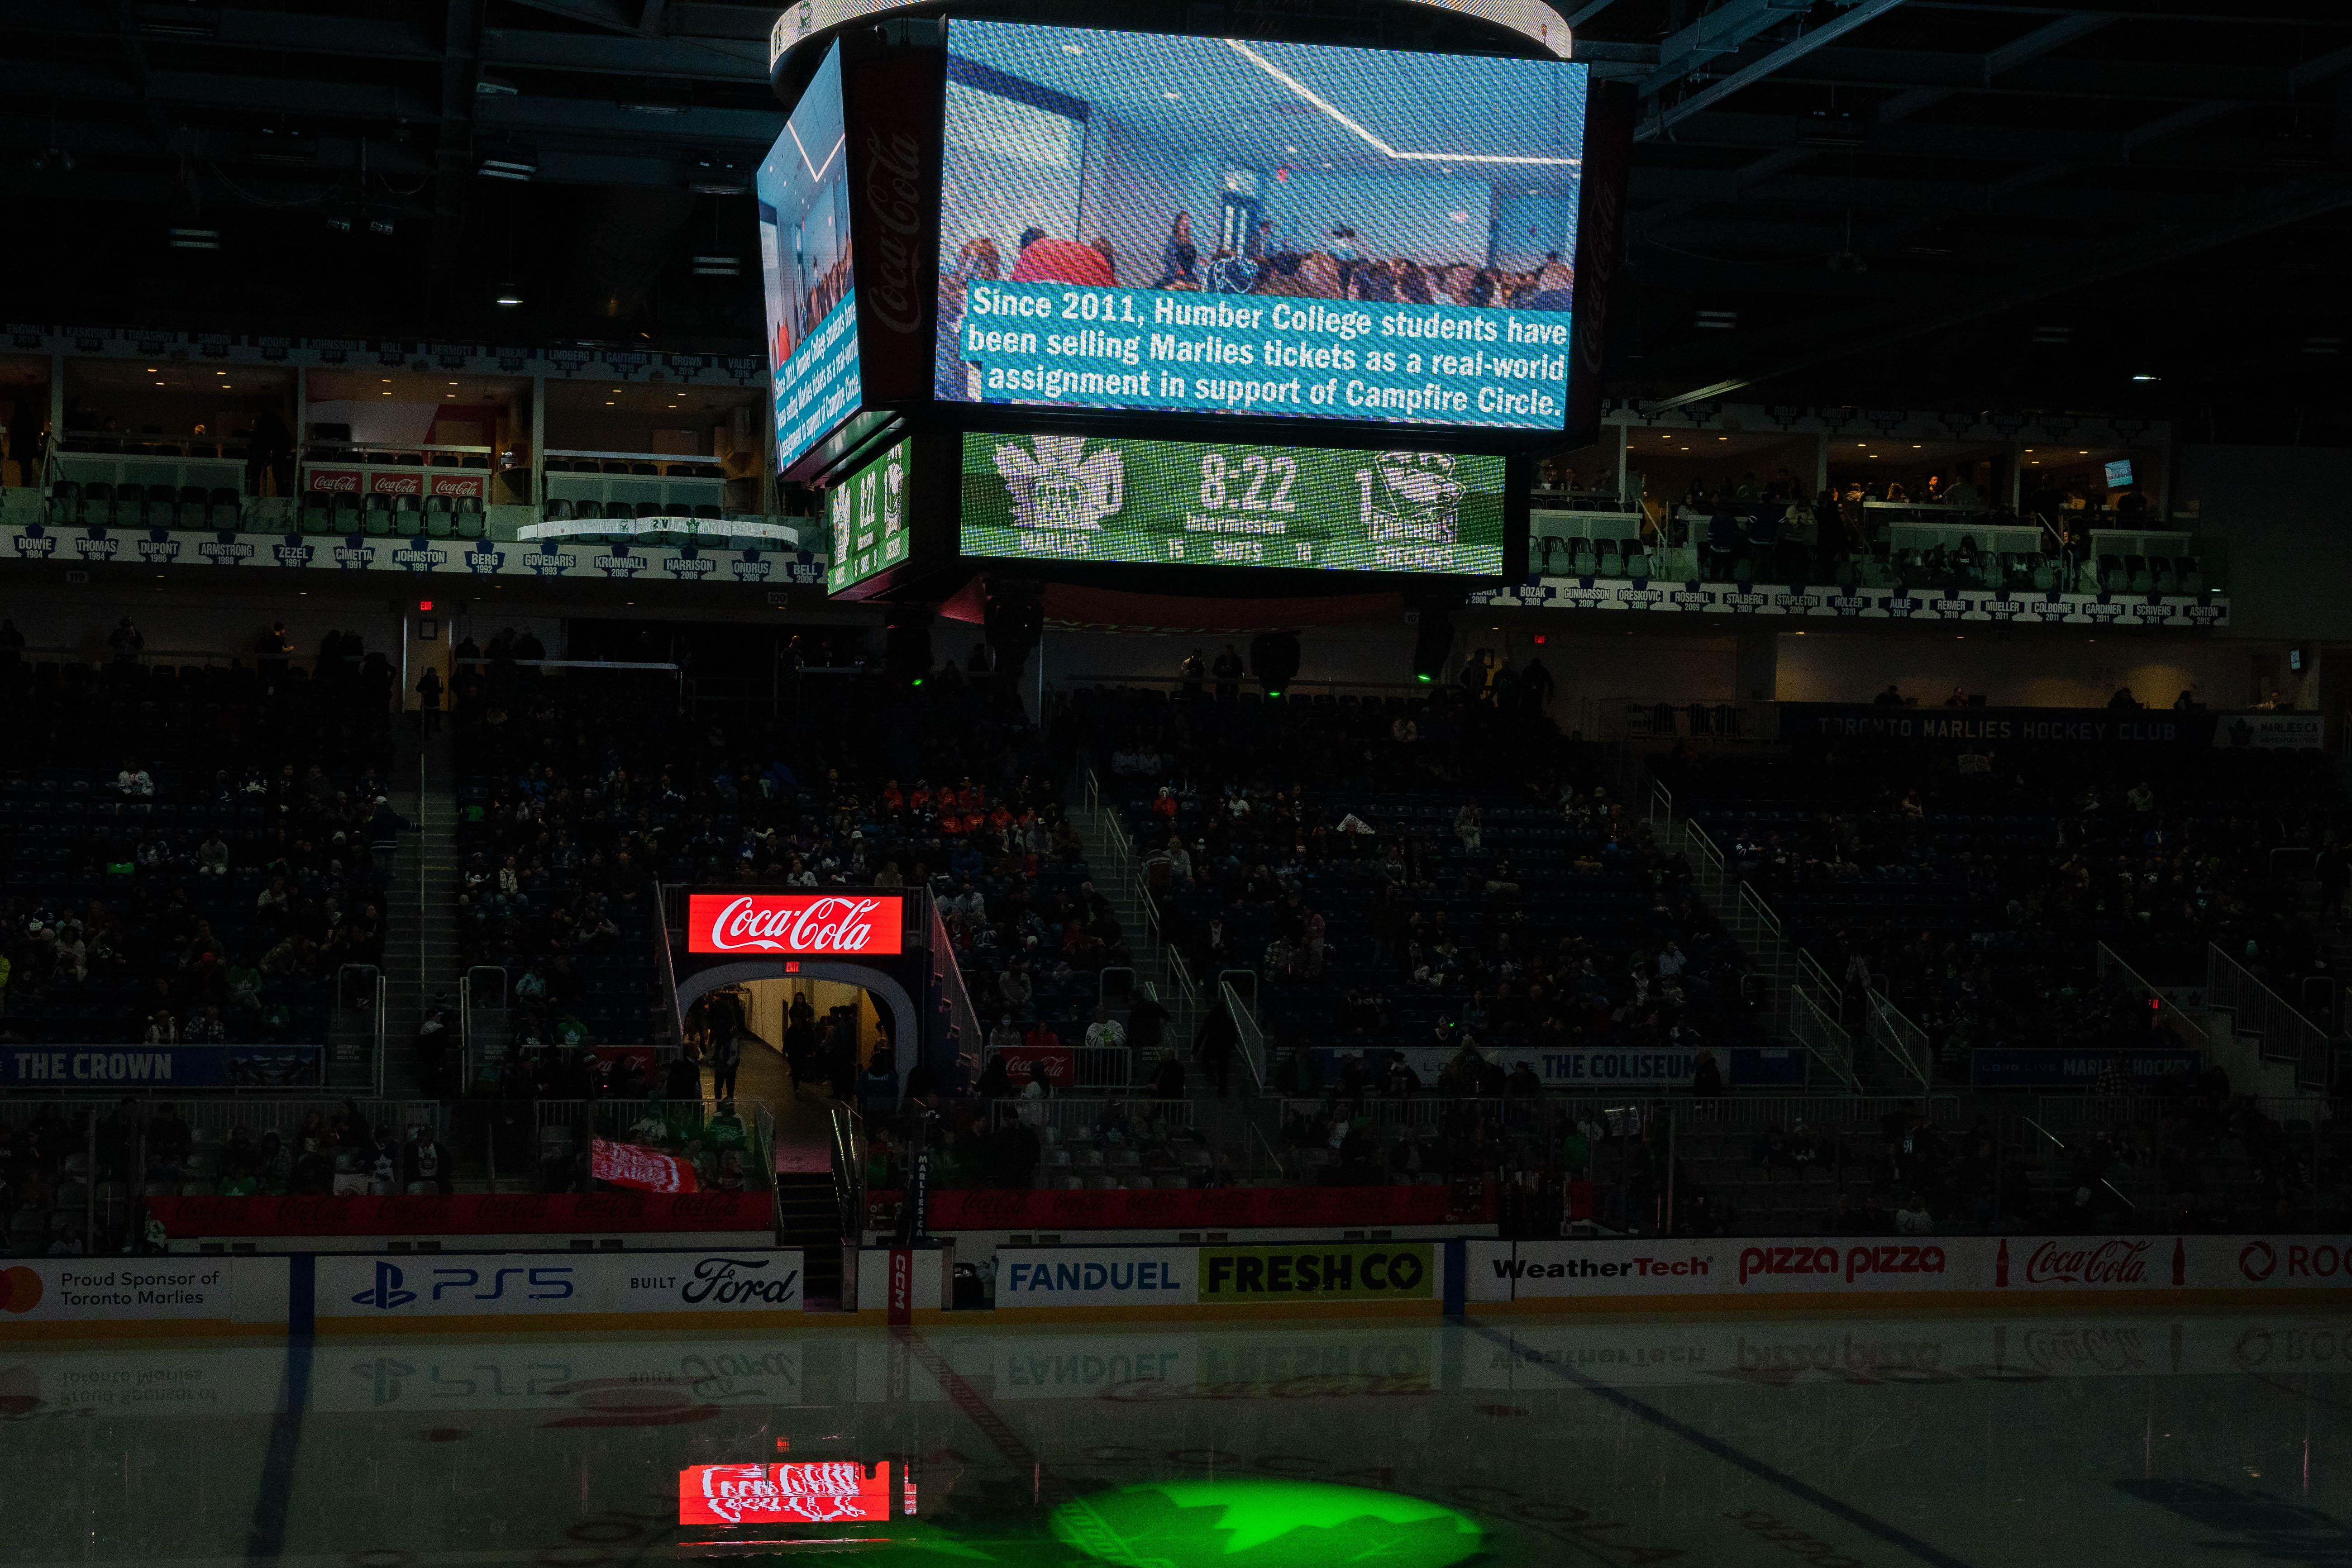 A screen reads ‘Since 2011, Humber College students have been selling Marlies tickets in support of Campfire Circle.